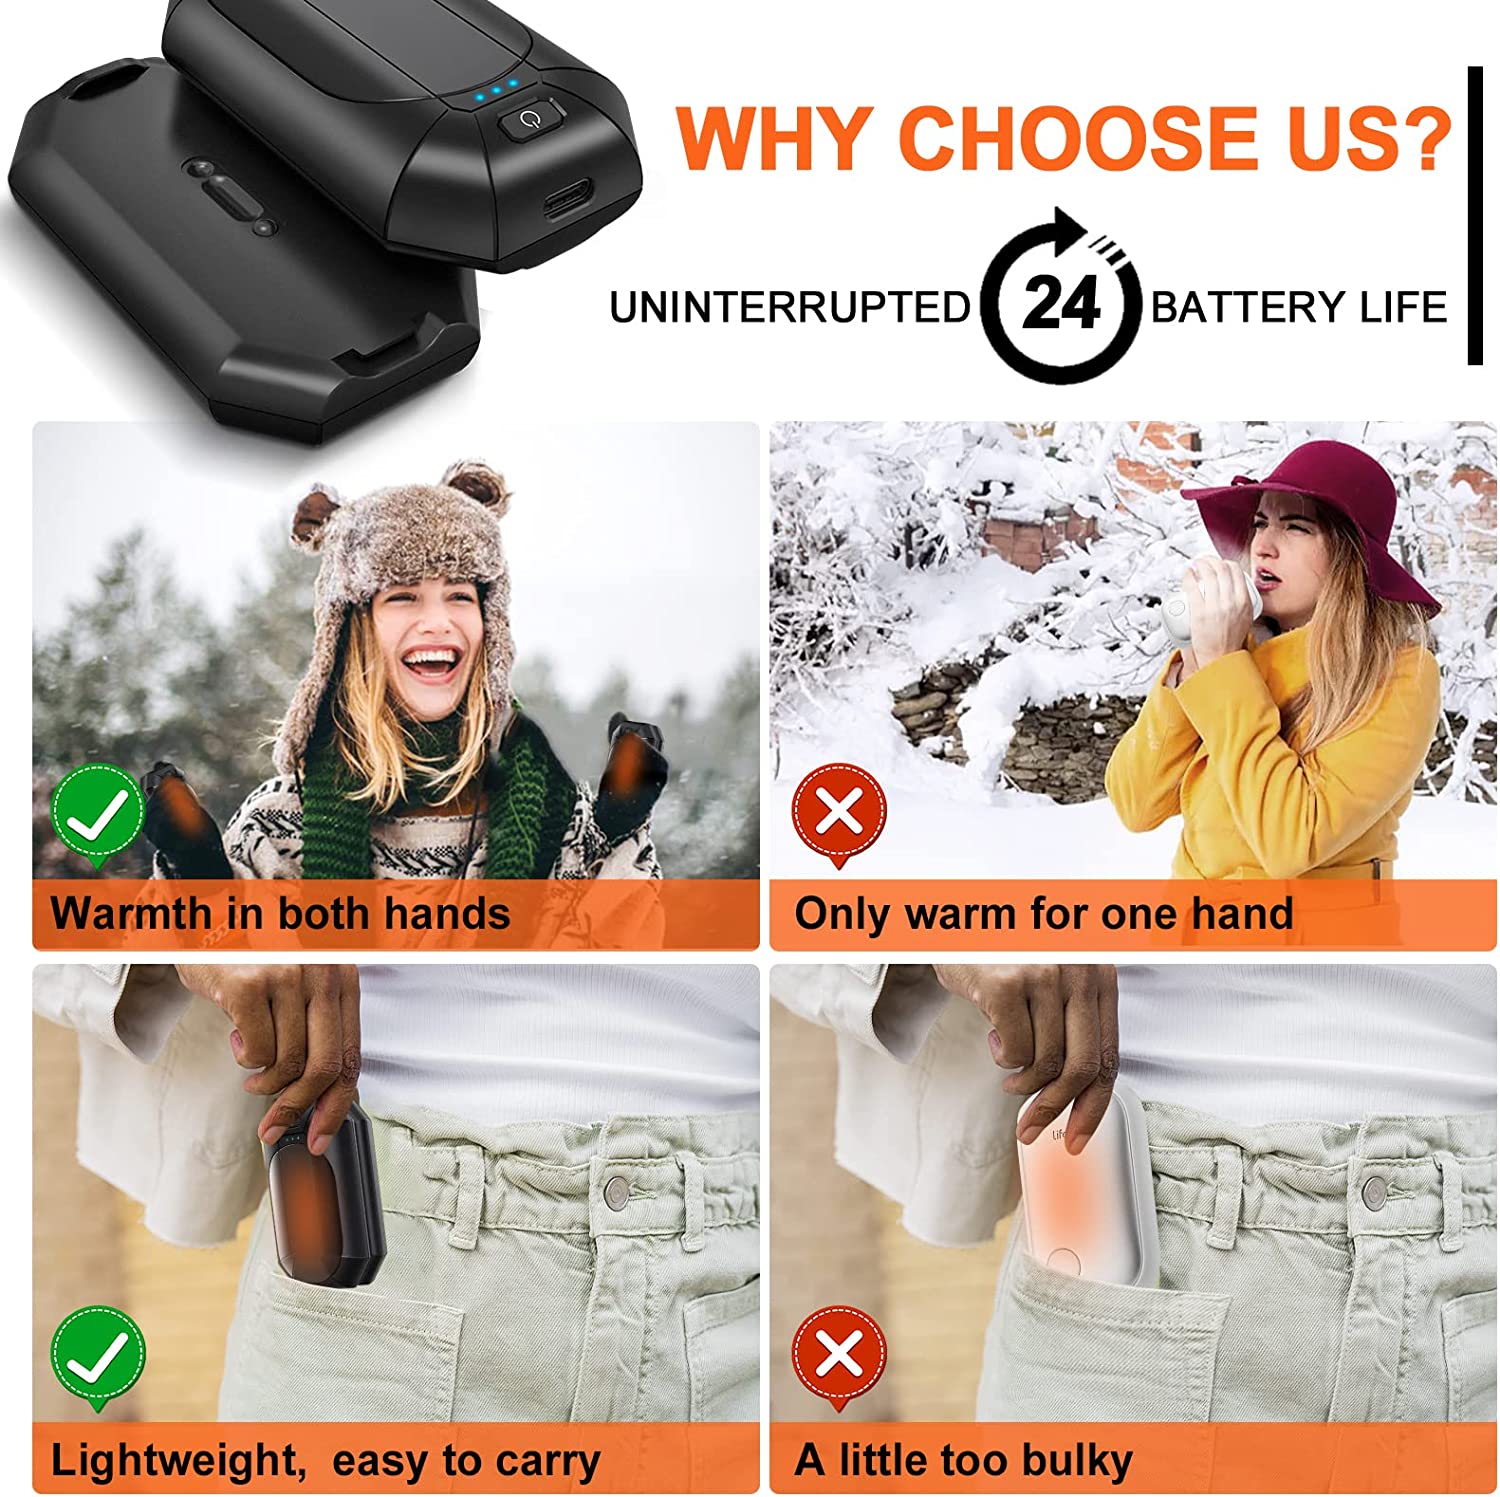 2 Pack Hand Warmers Rechargeable, Electric Hand Warmer Reusable,USB Handwarmers,Outdoor/Indoor/Golf/Camping/Hunting/Pain Relief/Watch Football/Baseball/Warm Gifts for Men Women Kid Birthday Christmas